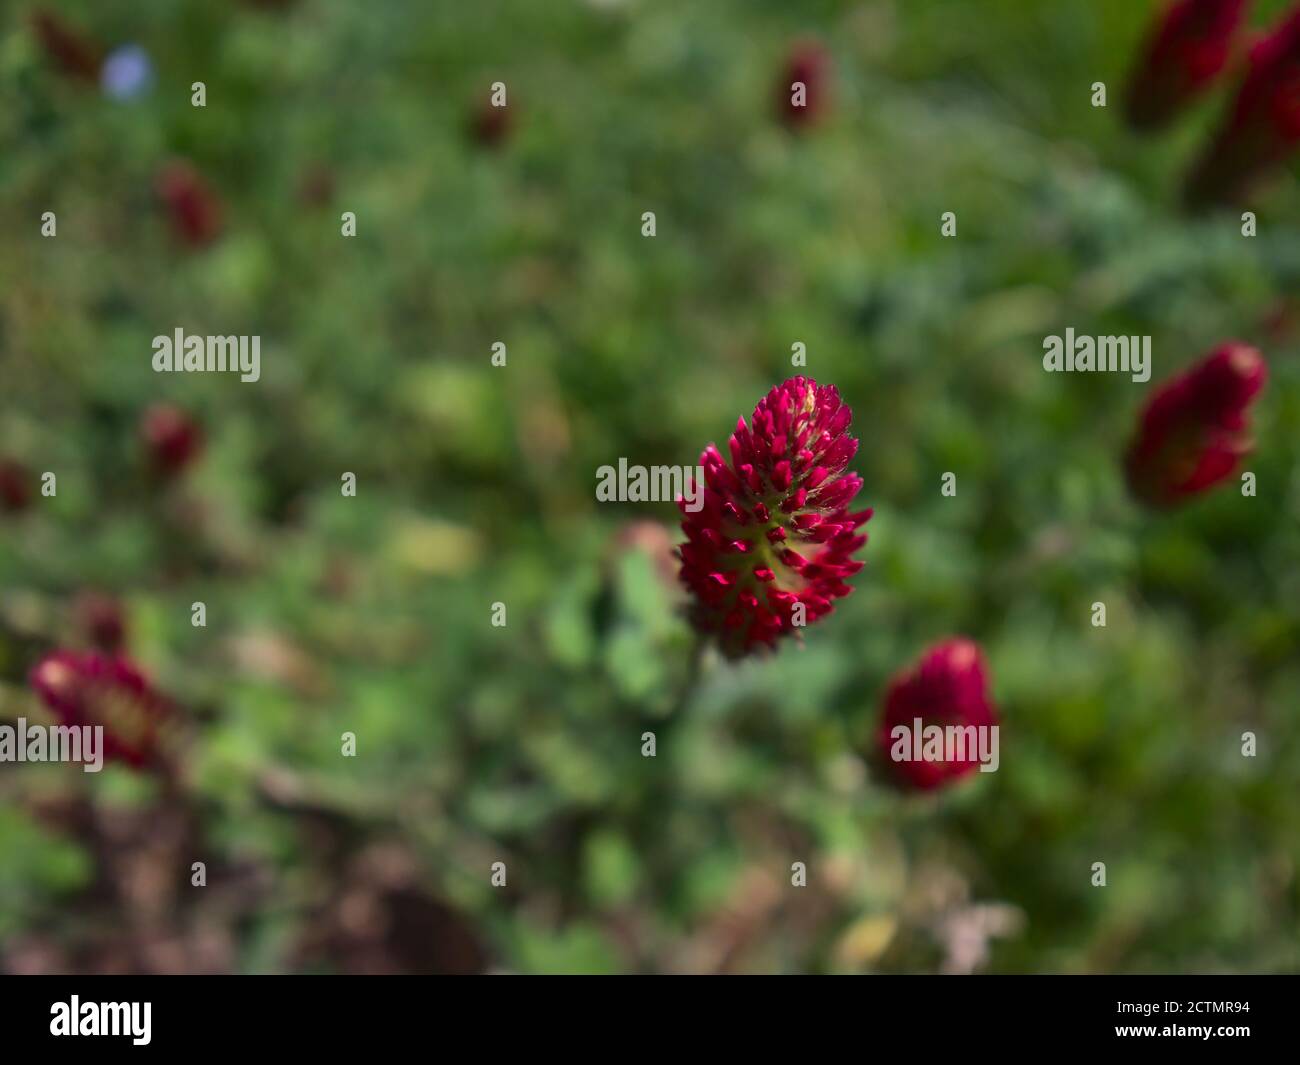 Closeup view of red blooming flower / herb crimson clover (also Italian clover, trifolium incarnatum) on a meadow. Stock Photo